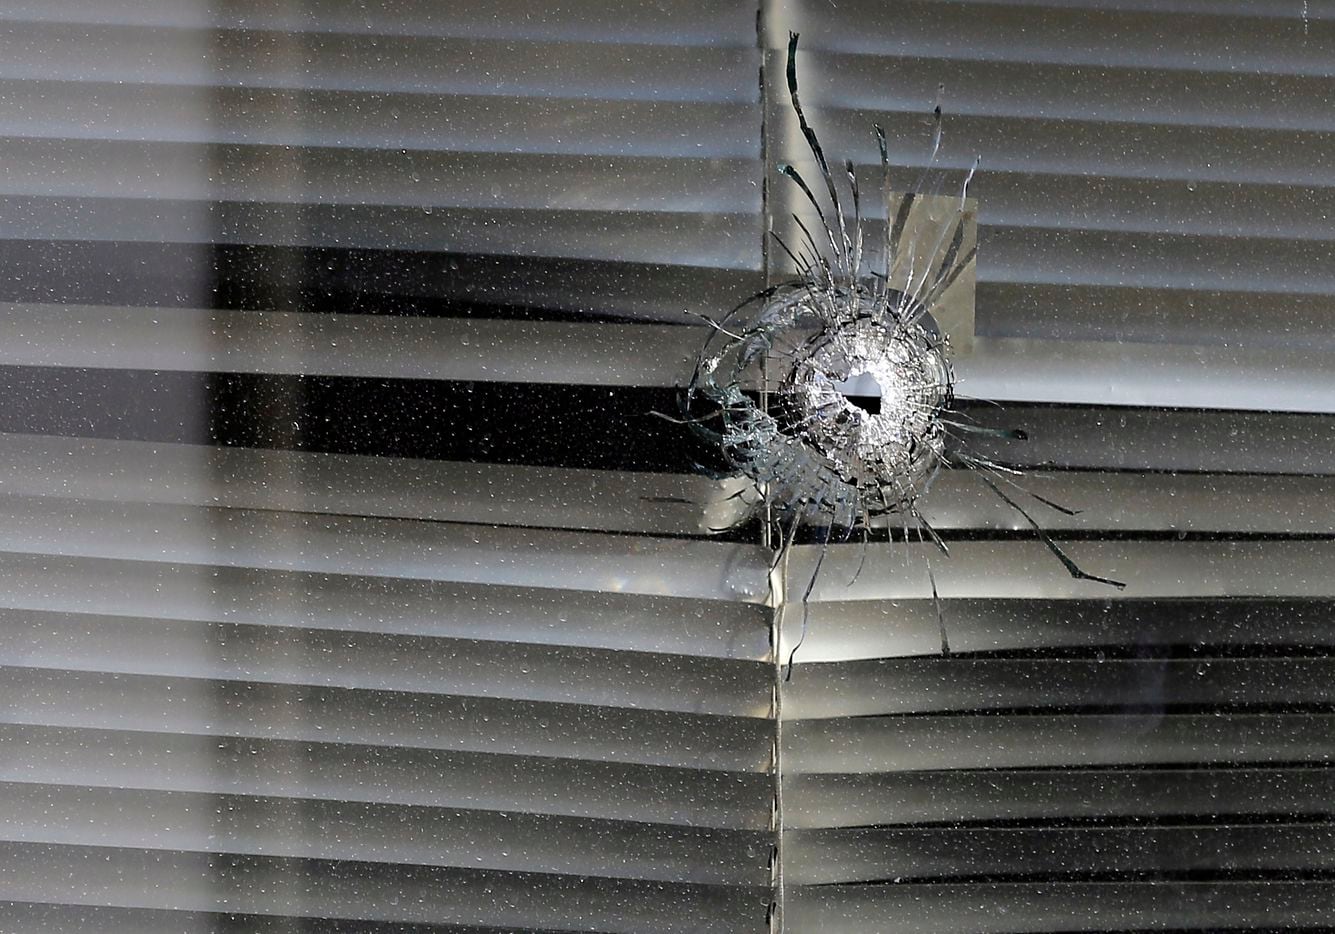 A bullet hole was seen in a window at El Centro College on July 14, 2016.